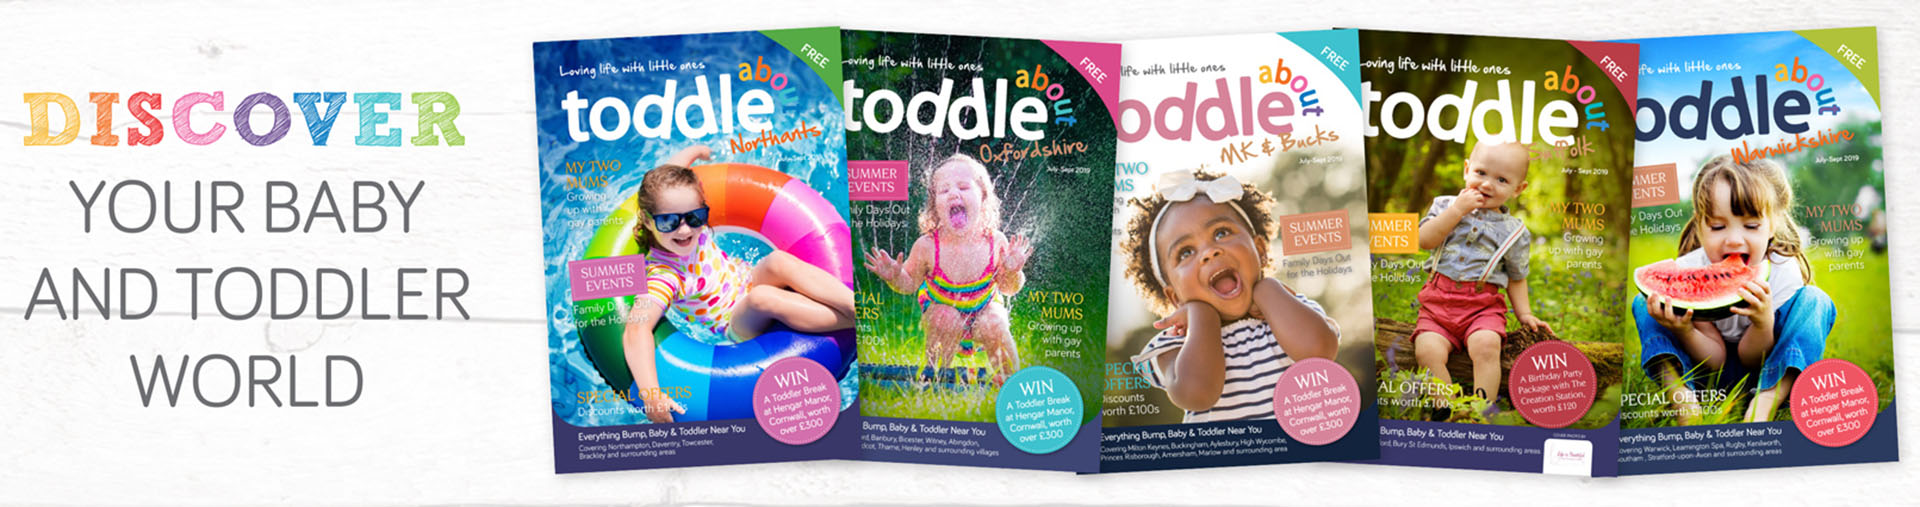 Toddle About's main image